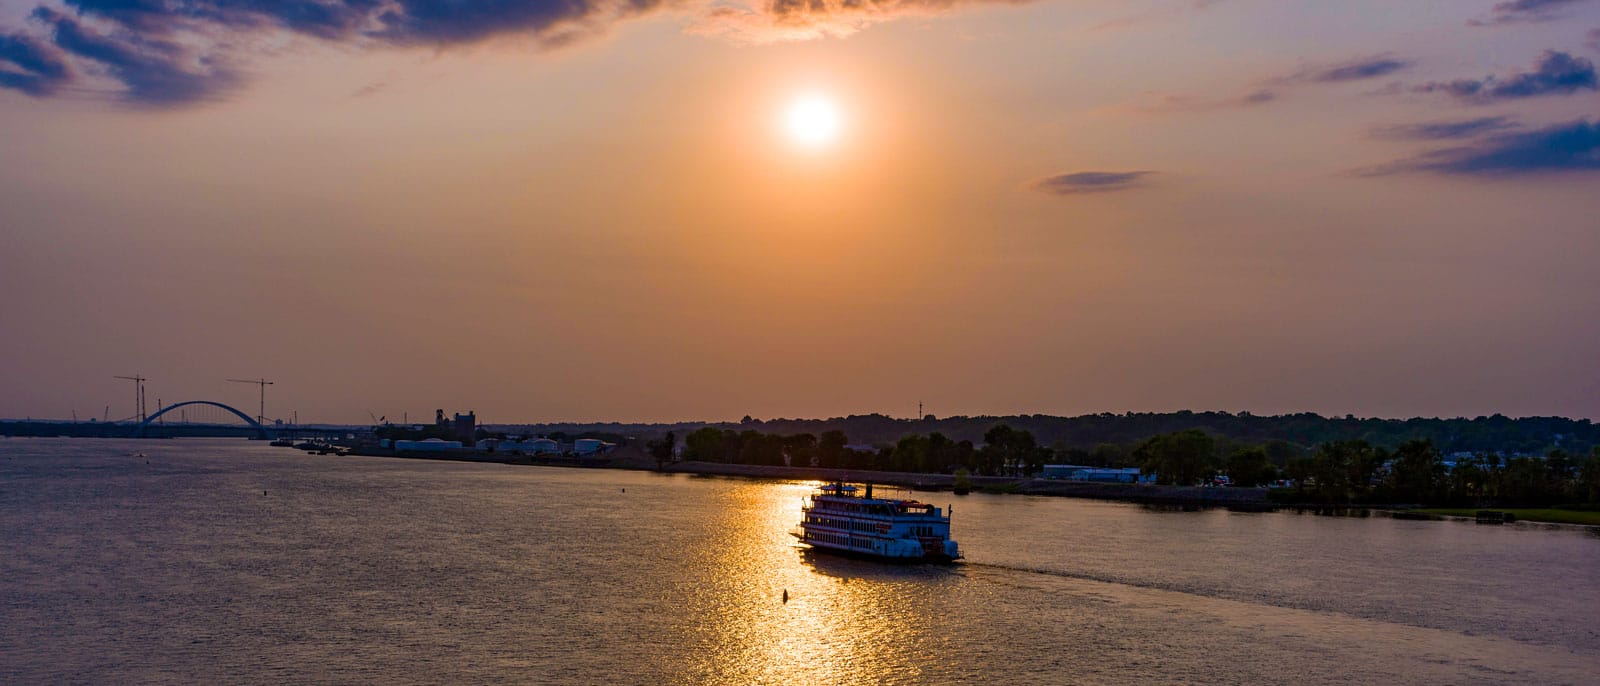 Boat on the Mississippi River with sun setting in background